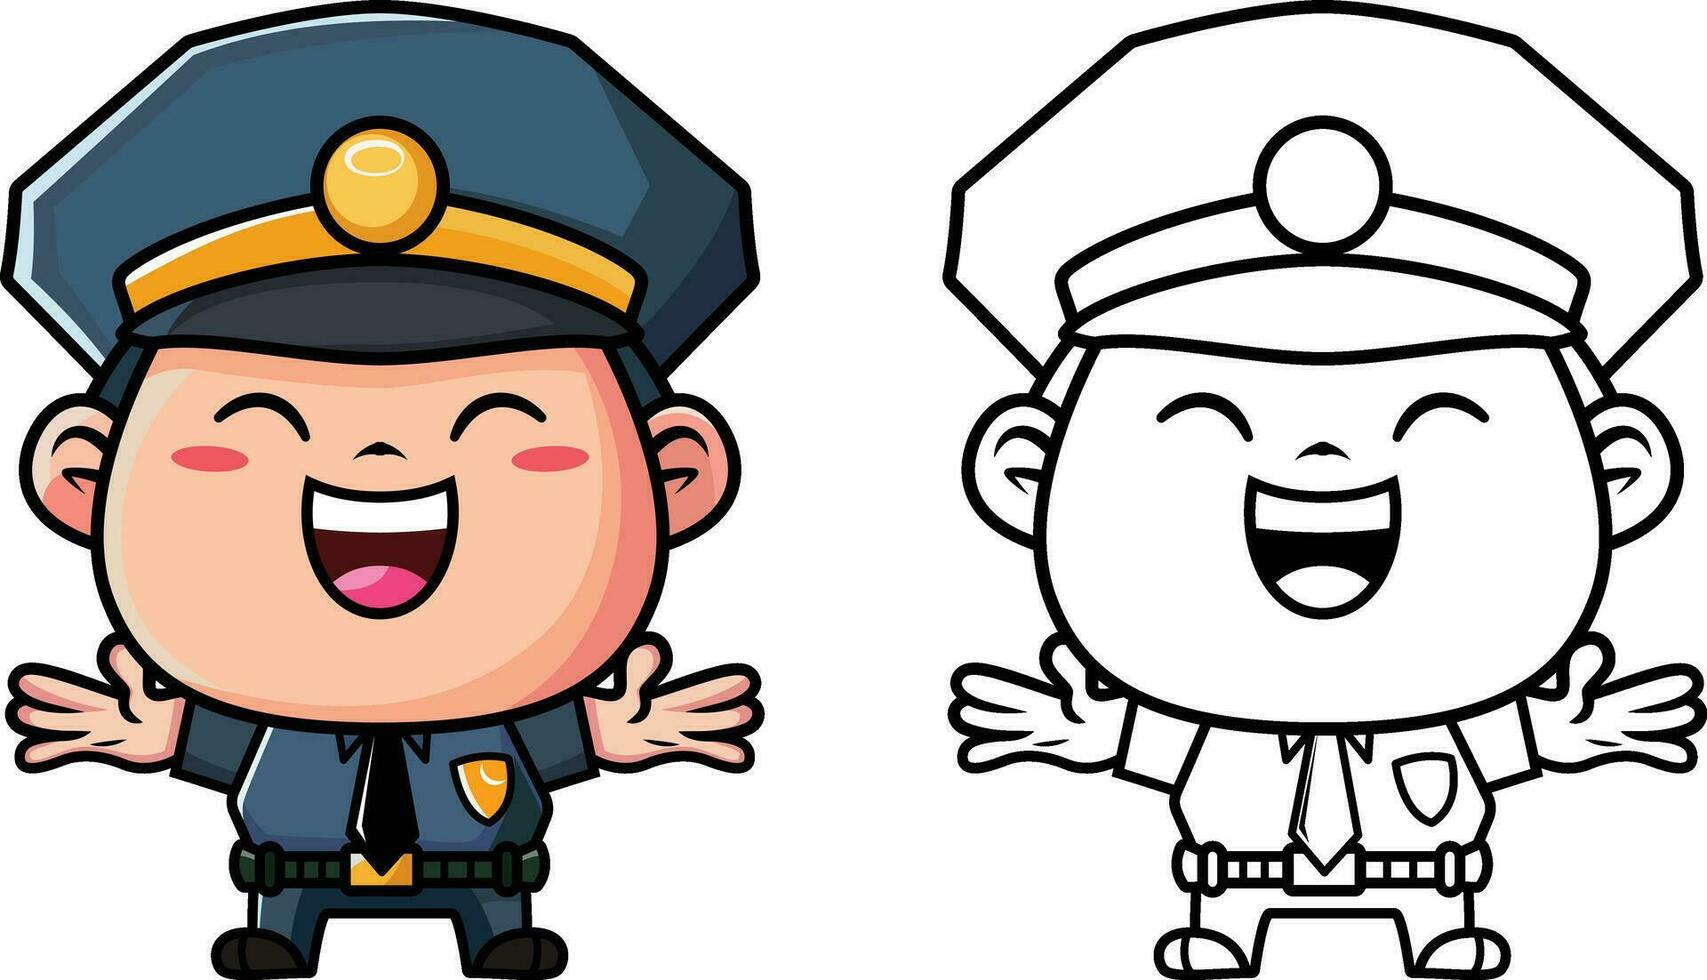 Happy Policeman, security guard cartoon vector illustration, Happy policeman with a smile colored and black and white line drawing vector image